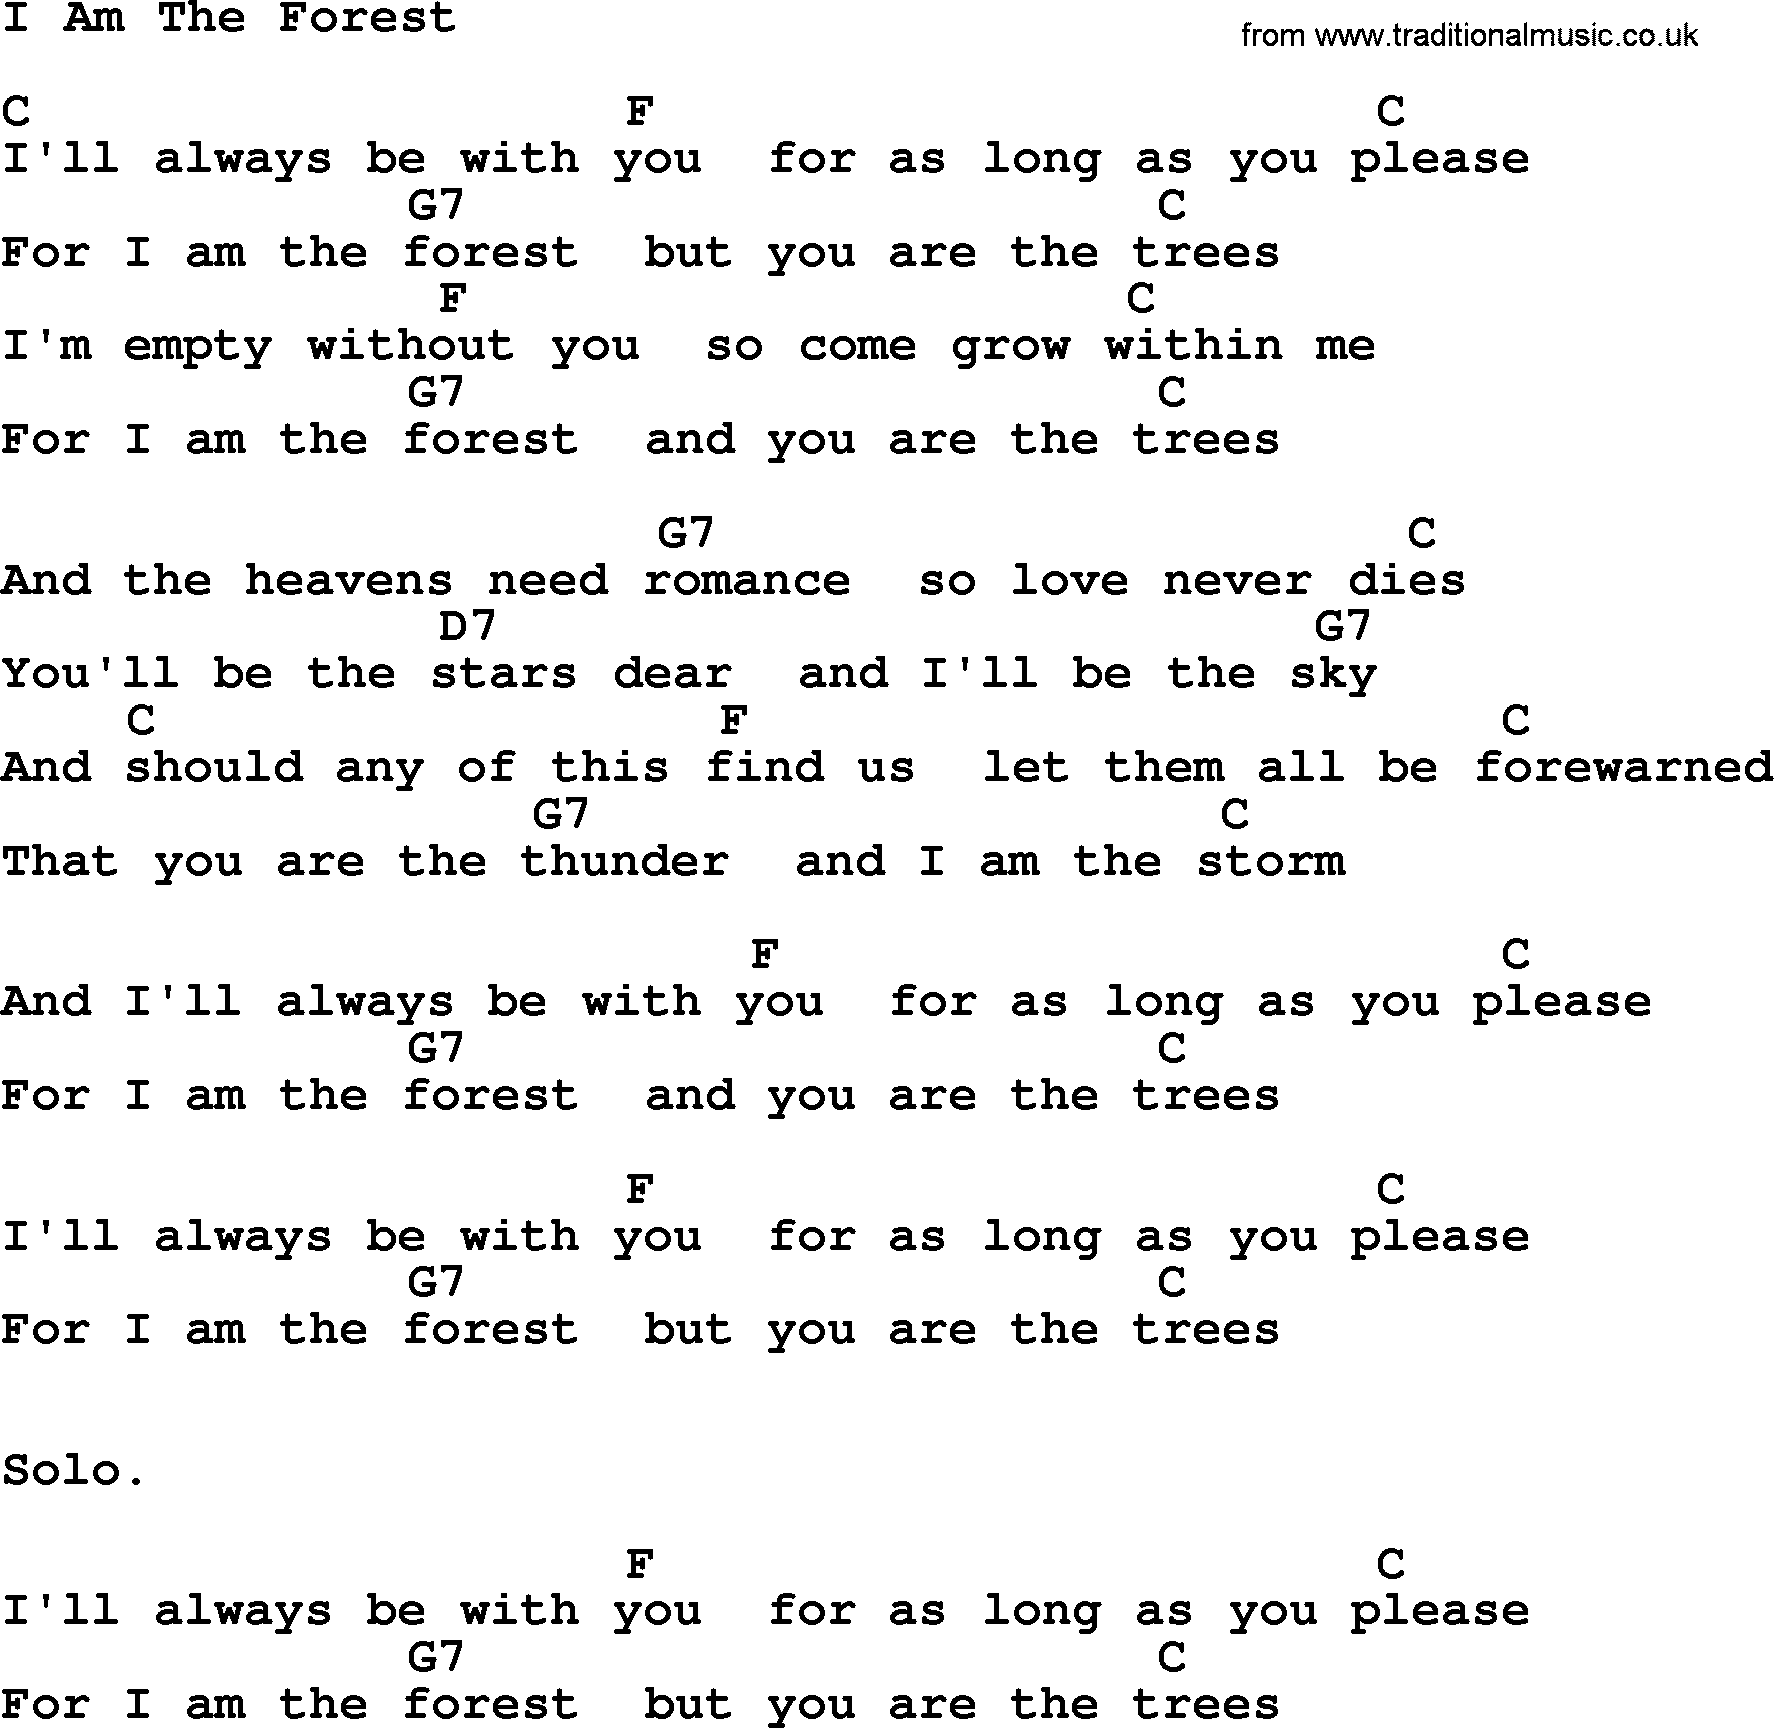 Willie Nelson song: I Am The Forest, lyrics and chords